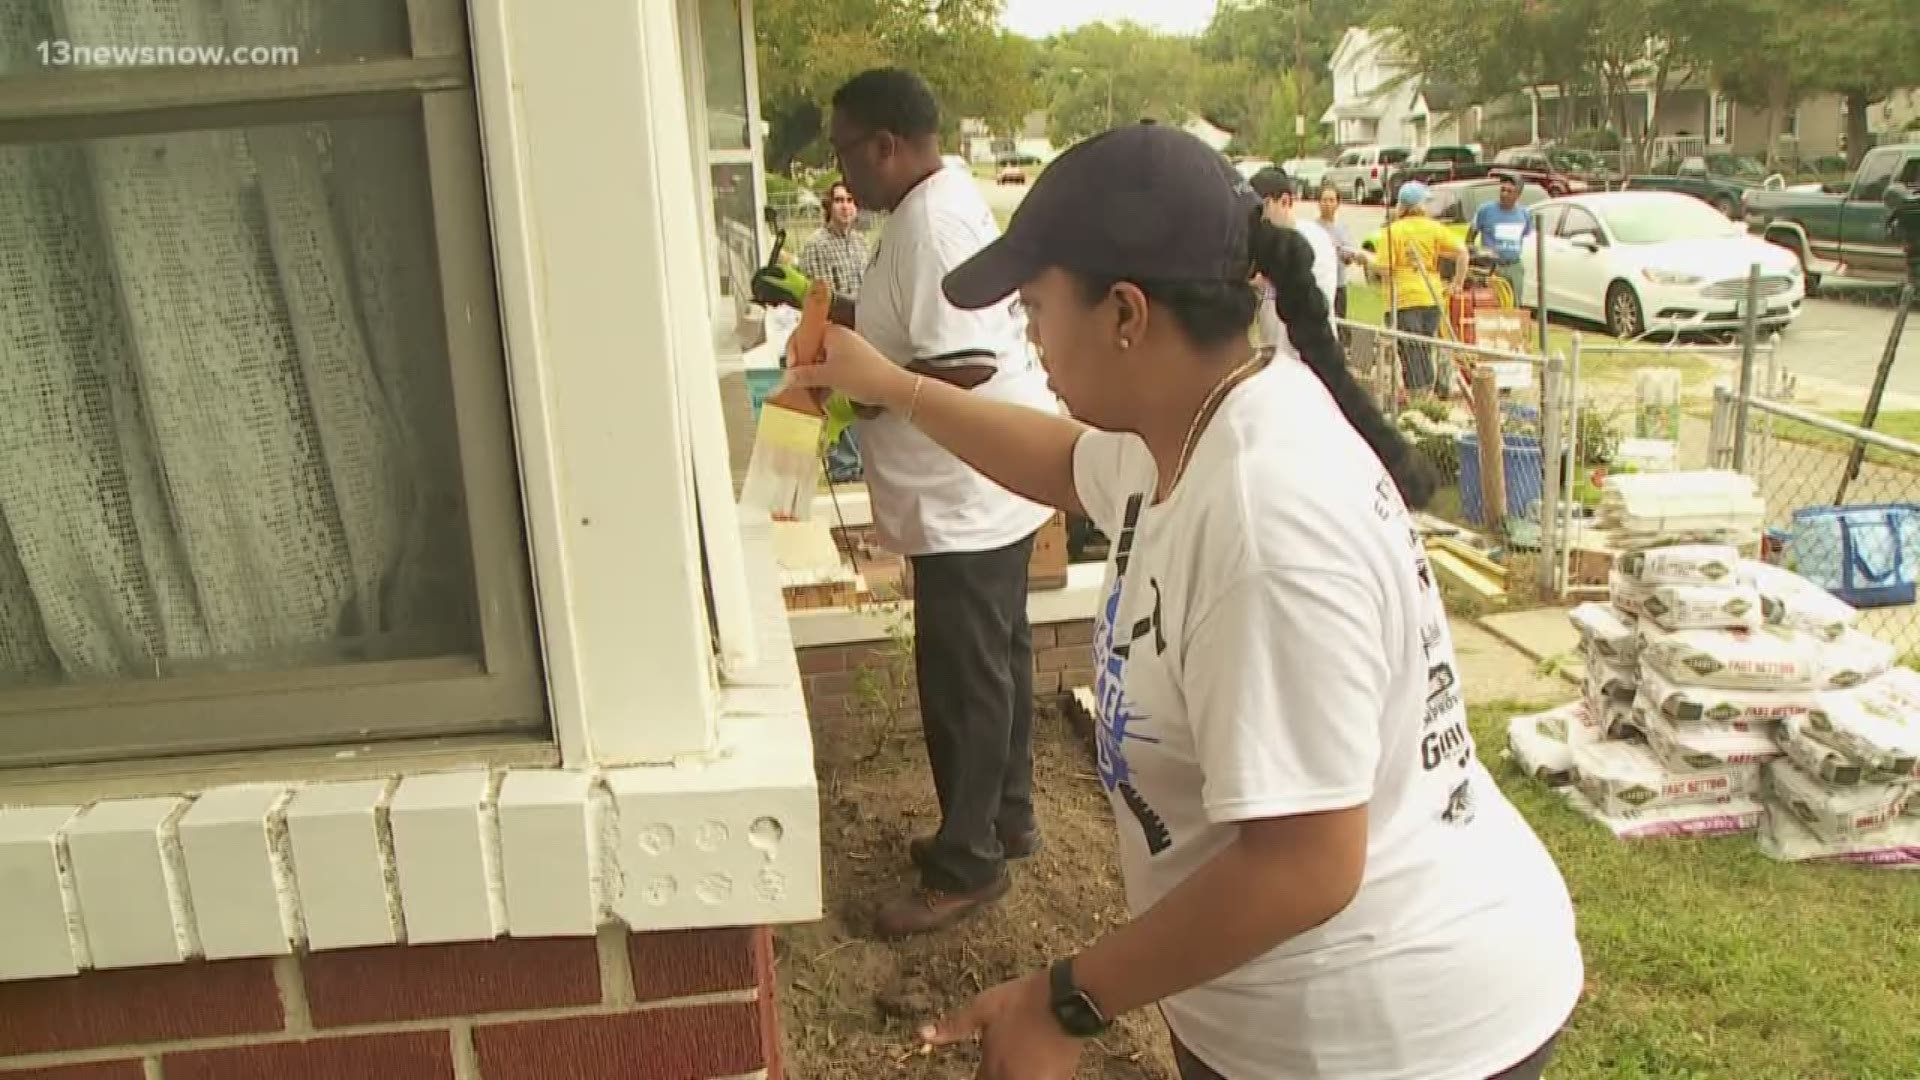 The upcoming blitz is a chance for the elderly, disabled, veterans, or low-income residents to get help making repairs to their homes.